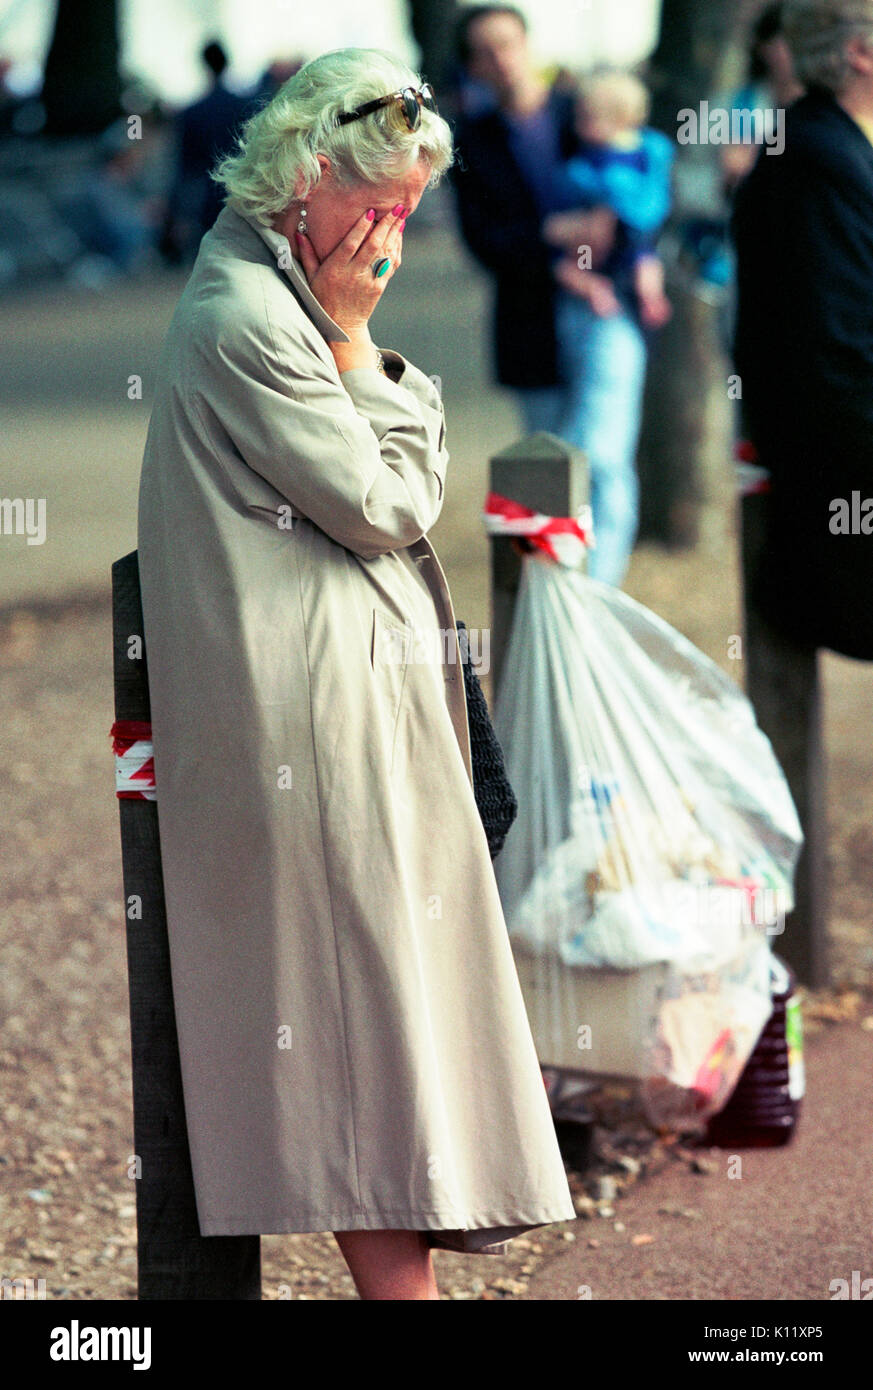 London, UK, 6th September, 1997. Funeral of Diana, Princess of Wales. A grieving woman is pictured in the Mall after having watched  Princess Diana's funeral cortege pass by. Stock Photo